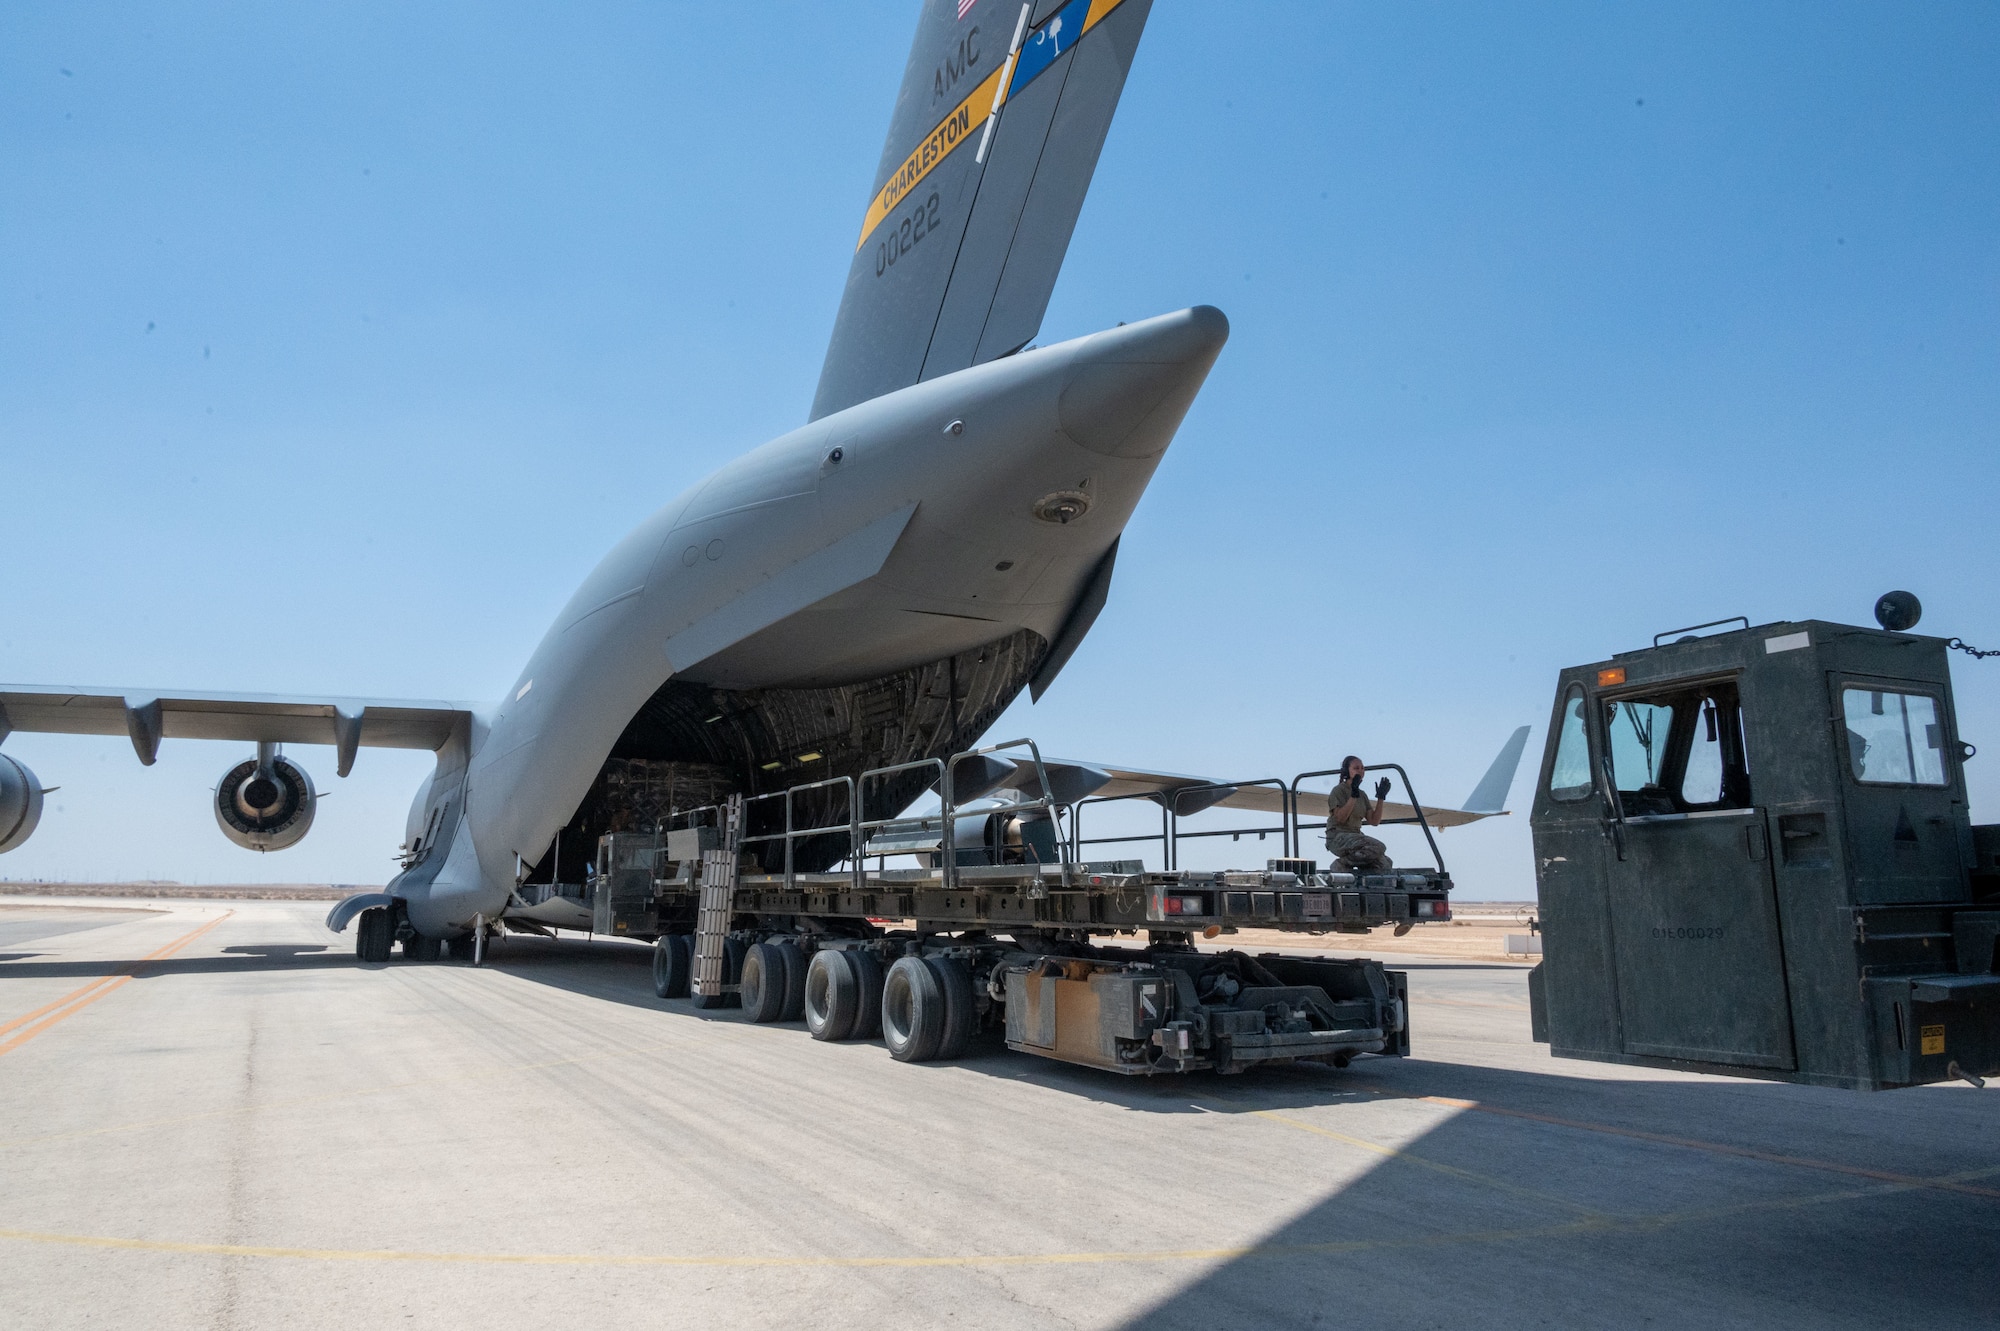 332d Expeditionary Logistics Readiness Squadron Aerial Port Airmen prepare to load cargo into a C-17 Globemaster III aircraft at an undisclosed location in Southwest Asia, May 7, 2022. Working in concert to coordinate movement of aircraft, passengers, equipment, and everything else requiring air travel, the 332d ELRS’s Aerial Port enables the 332d Air Expeditionary Wing to continue to provide regional security throughout its area of responsibility.